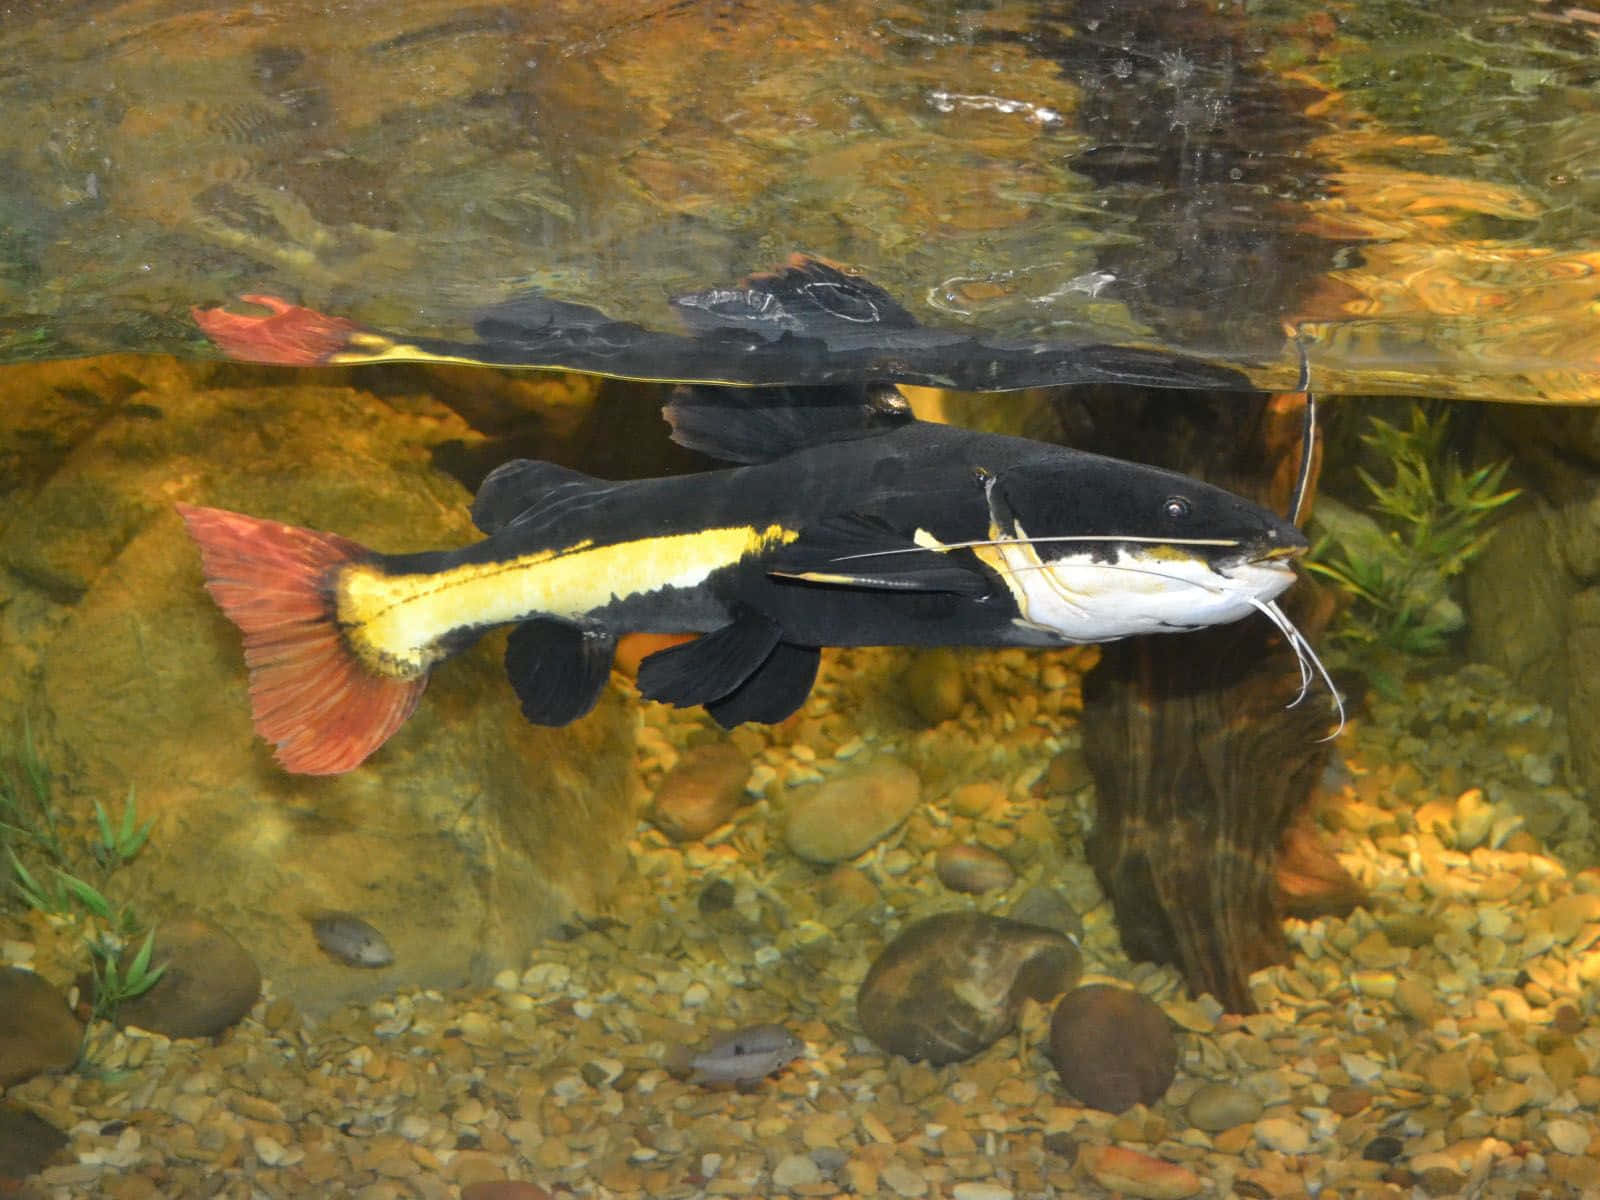 A Large Catfish Swimming in the Water